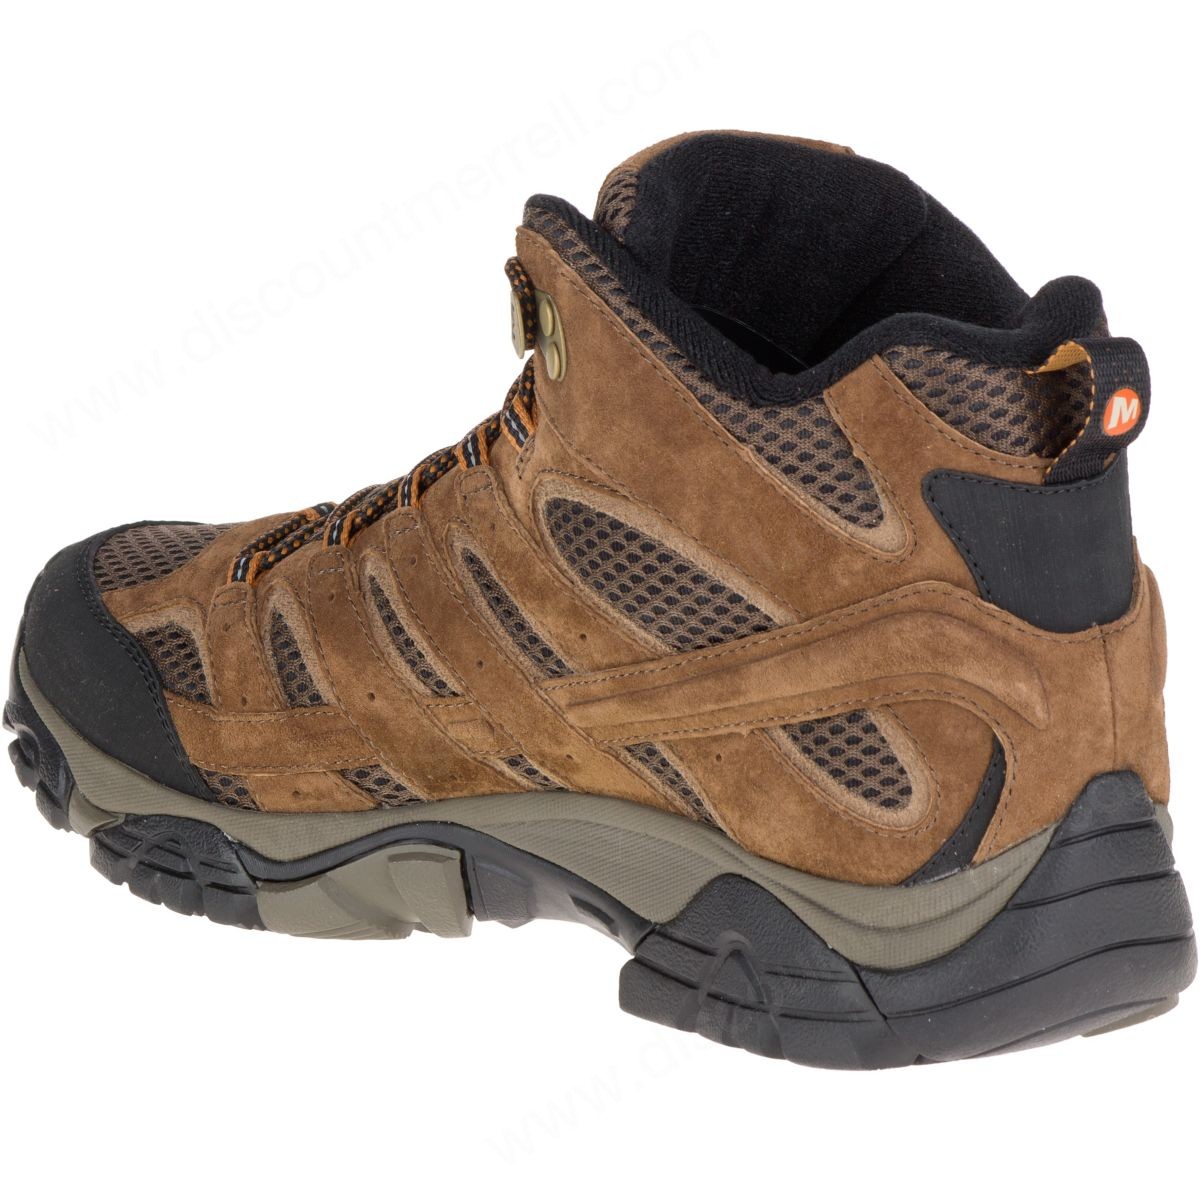 Merrell Man's Moab Mother Of All Boots™ Mid Waterproof Earth - -6